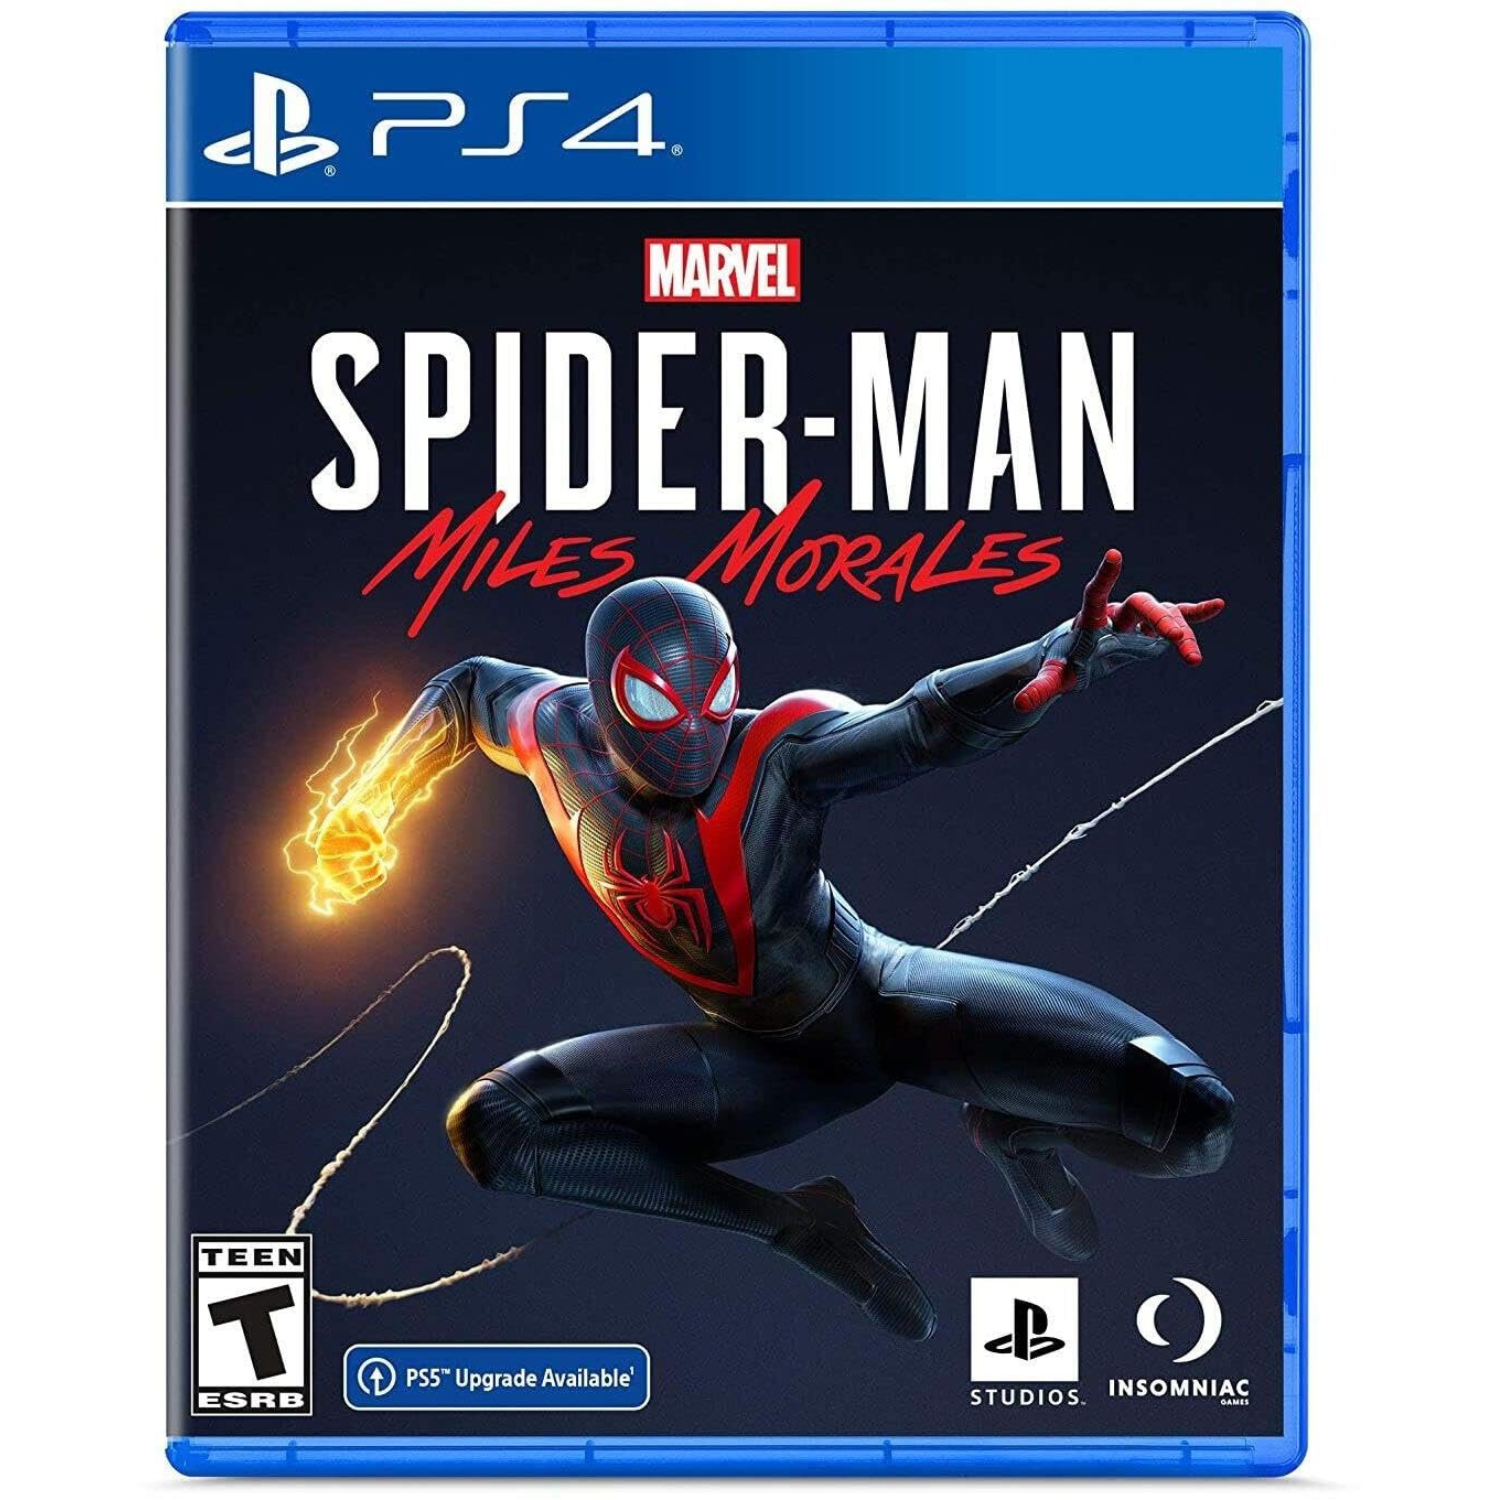 Marvel Spiderman Miles Morales (Ps5 Upgrade Available) Ps4